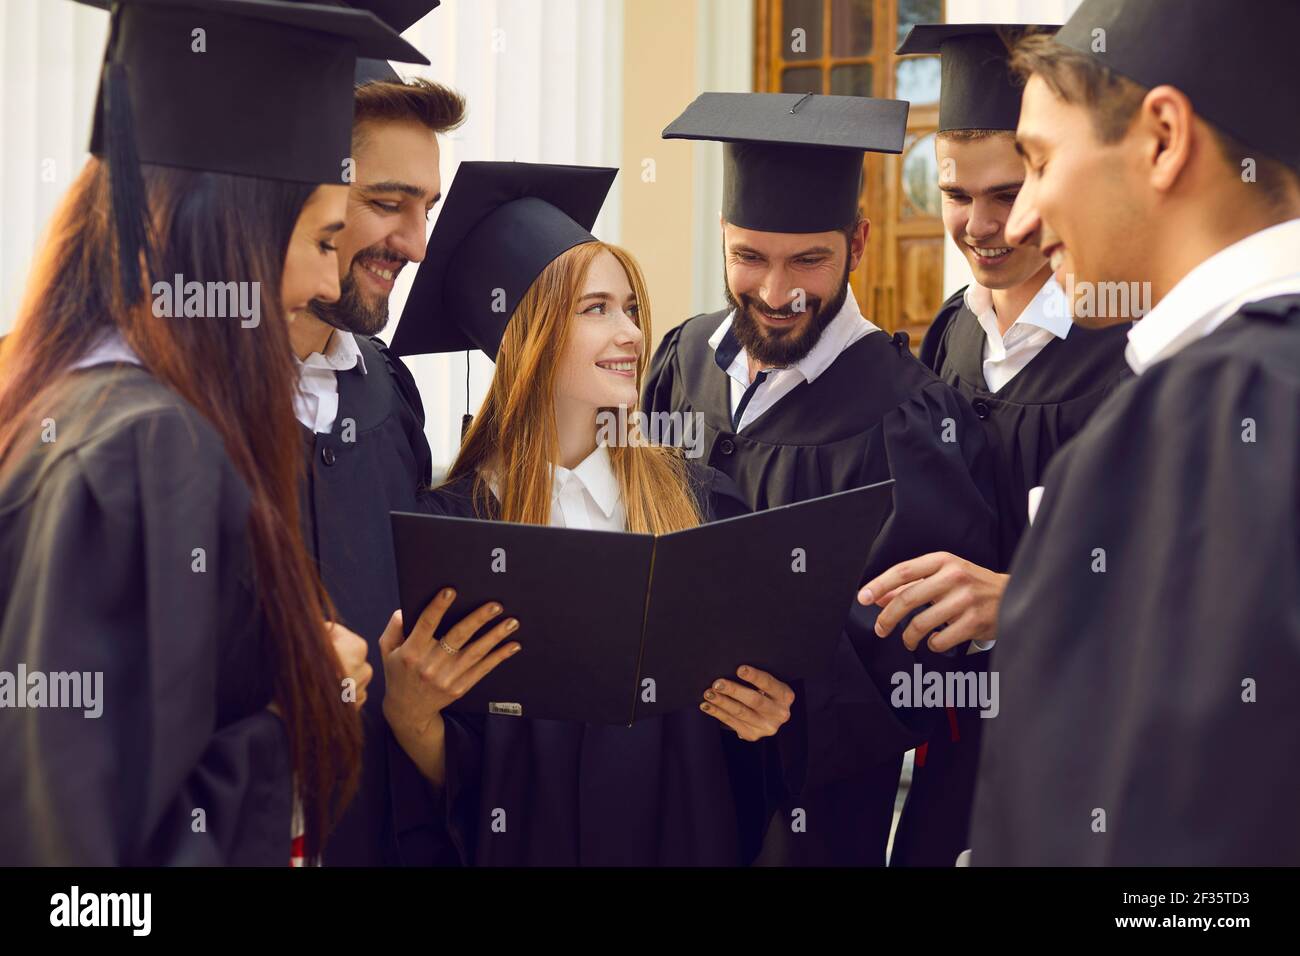 Group of young smiling happy students university graduates standing looking at girl mate diploma Stock Photo